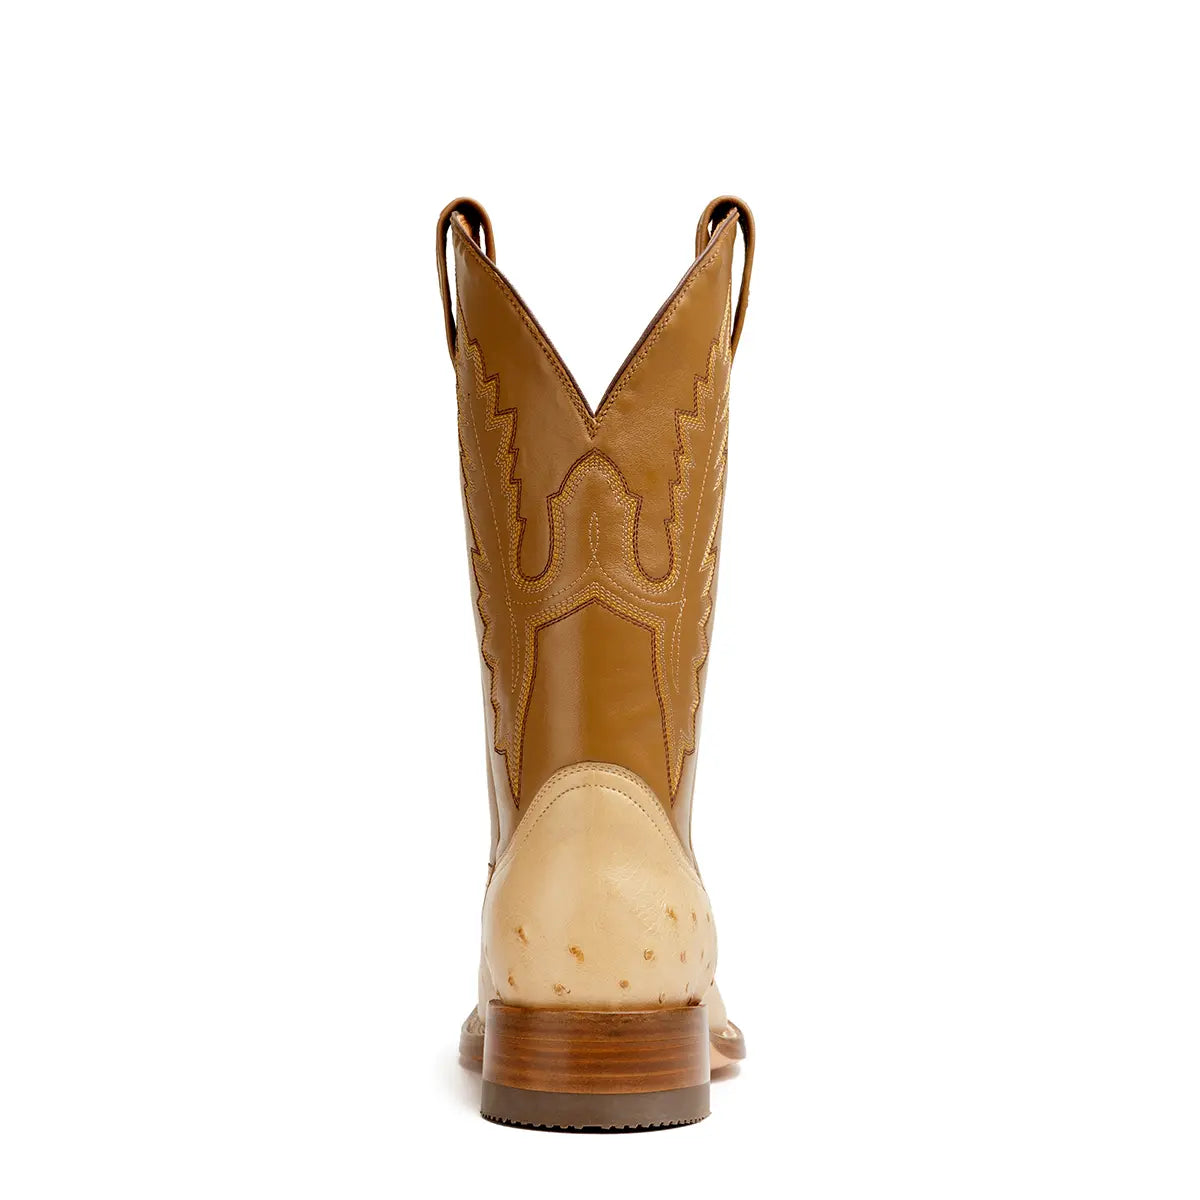 Arroyo Smooth Ostrich Stockman Square Toe Boot - Oryx